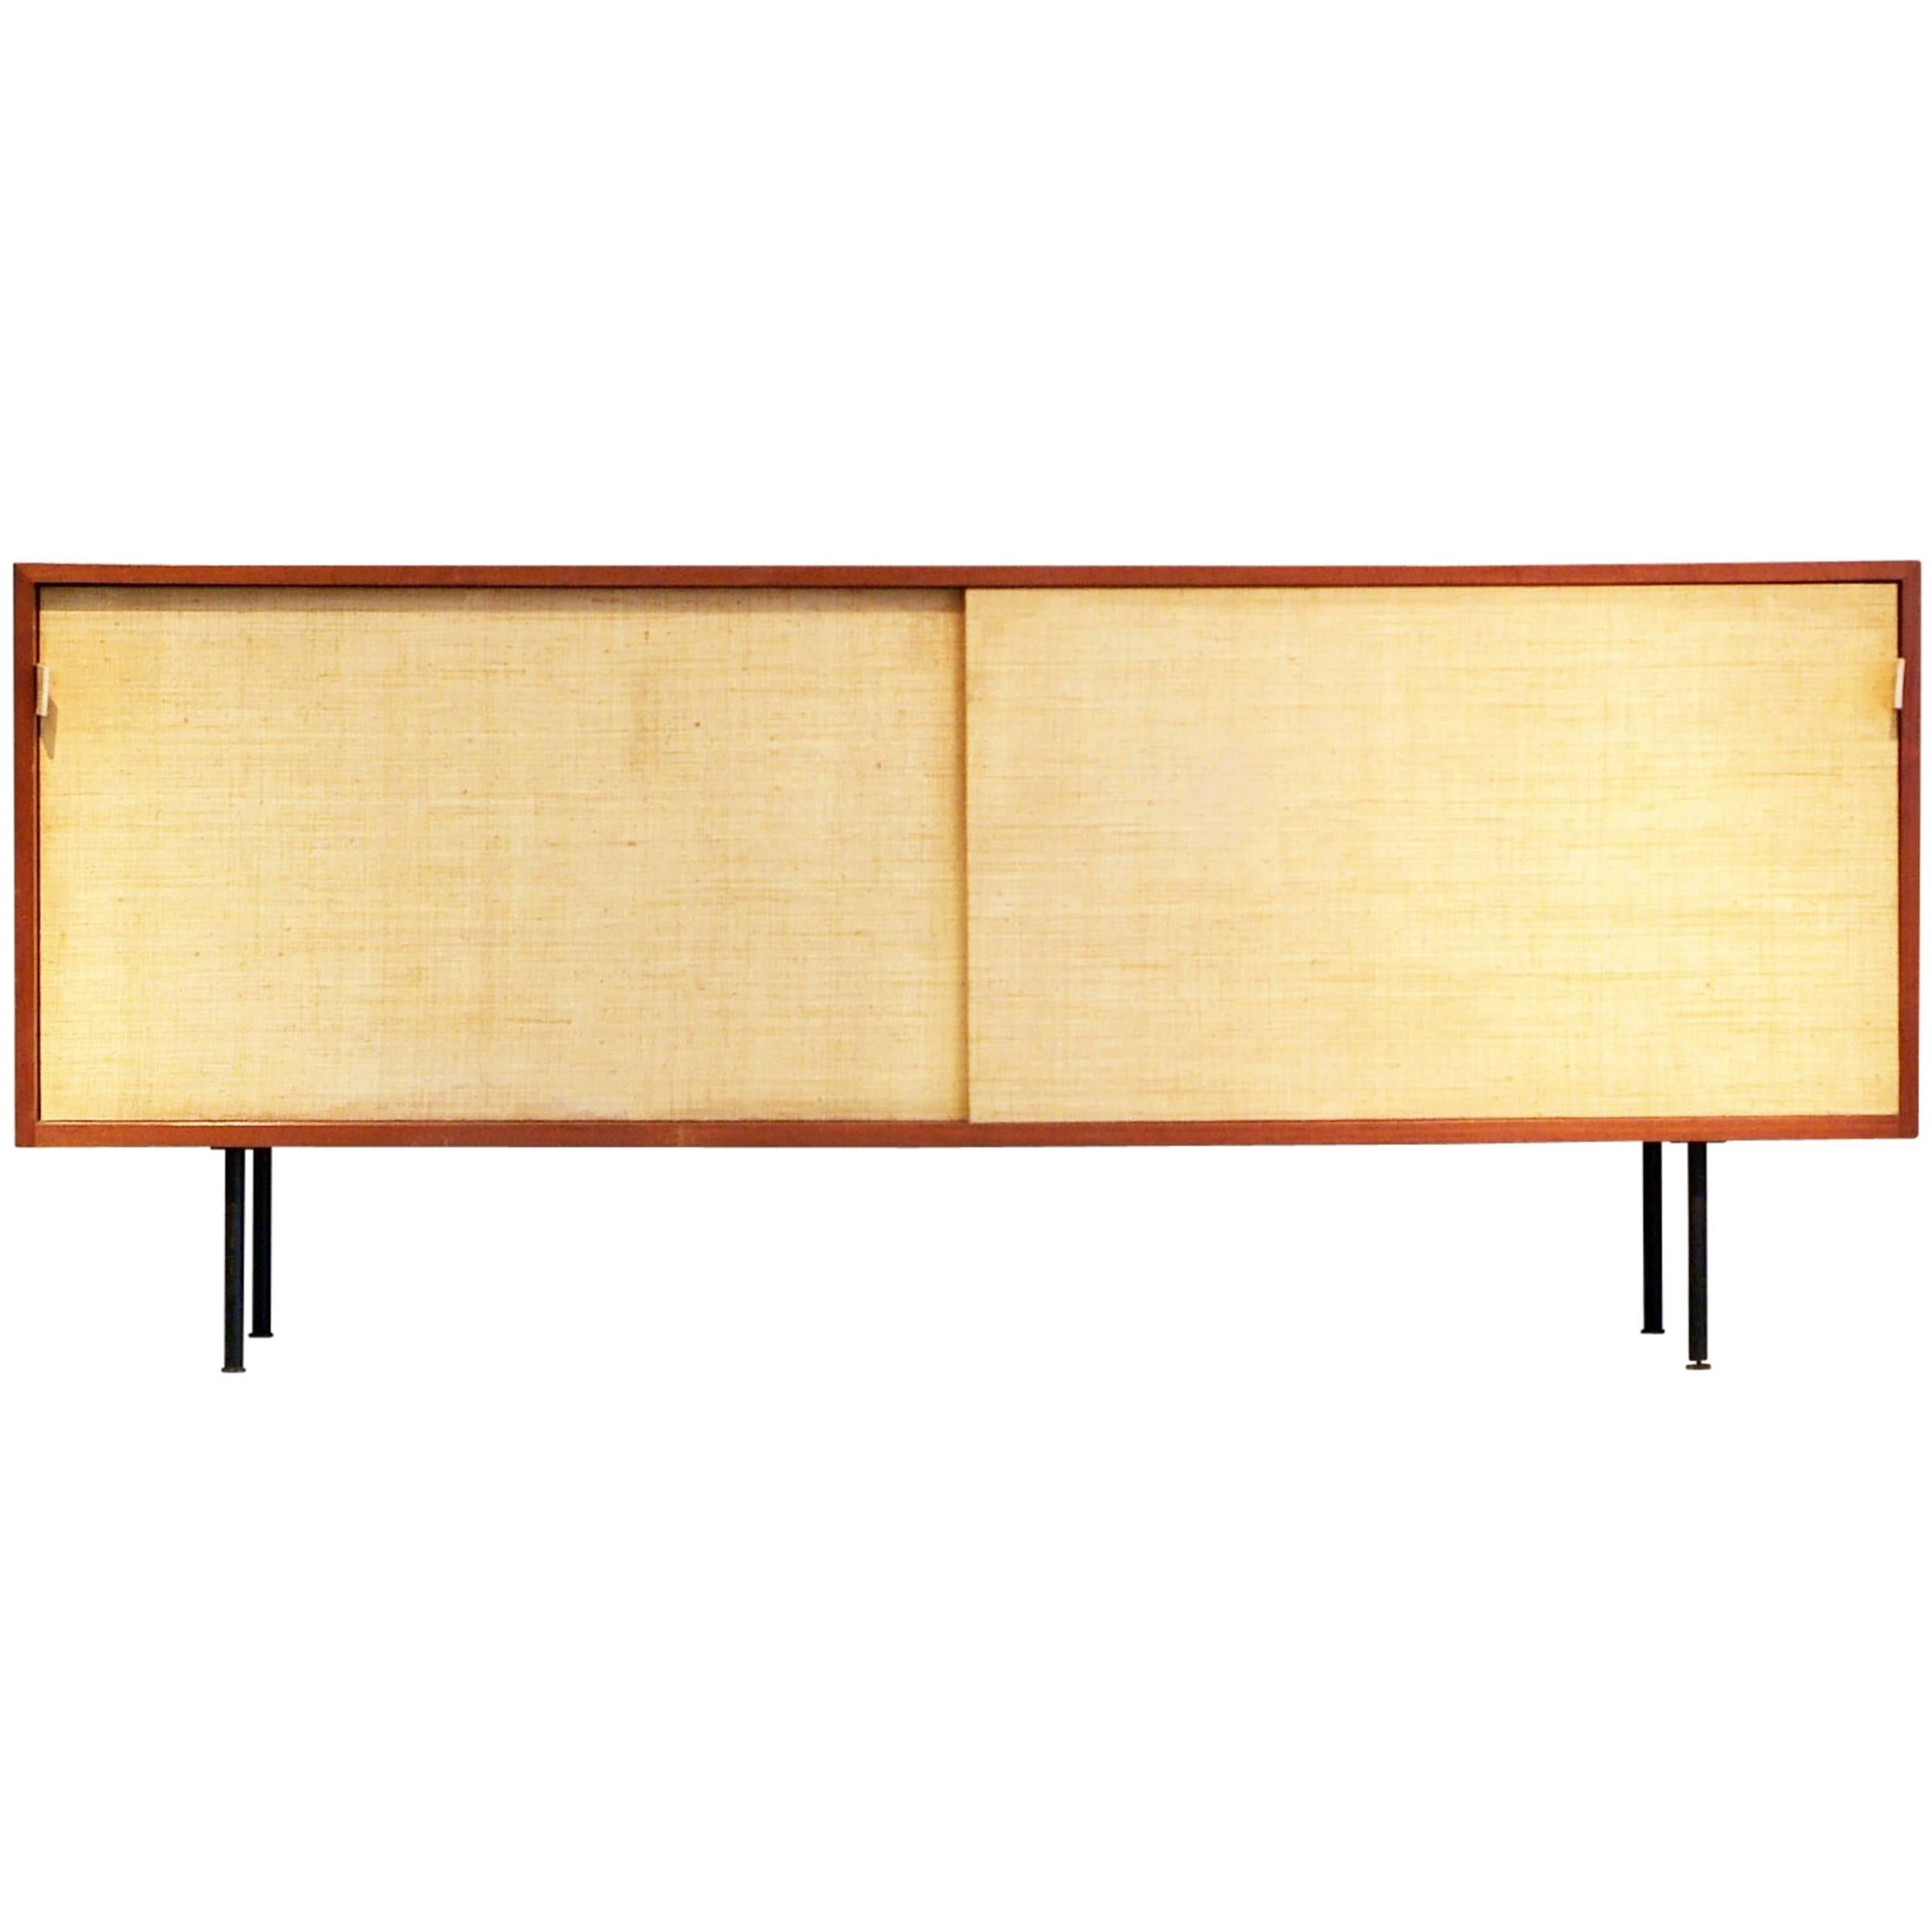 Florence Knoll Seagrass Credenza Sideboard Cabinet Knoll International Teak Rare